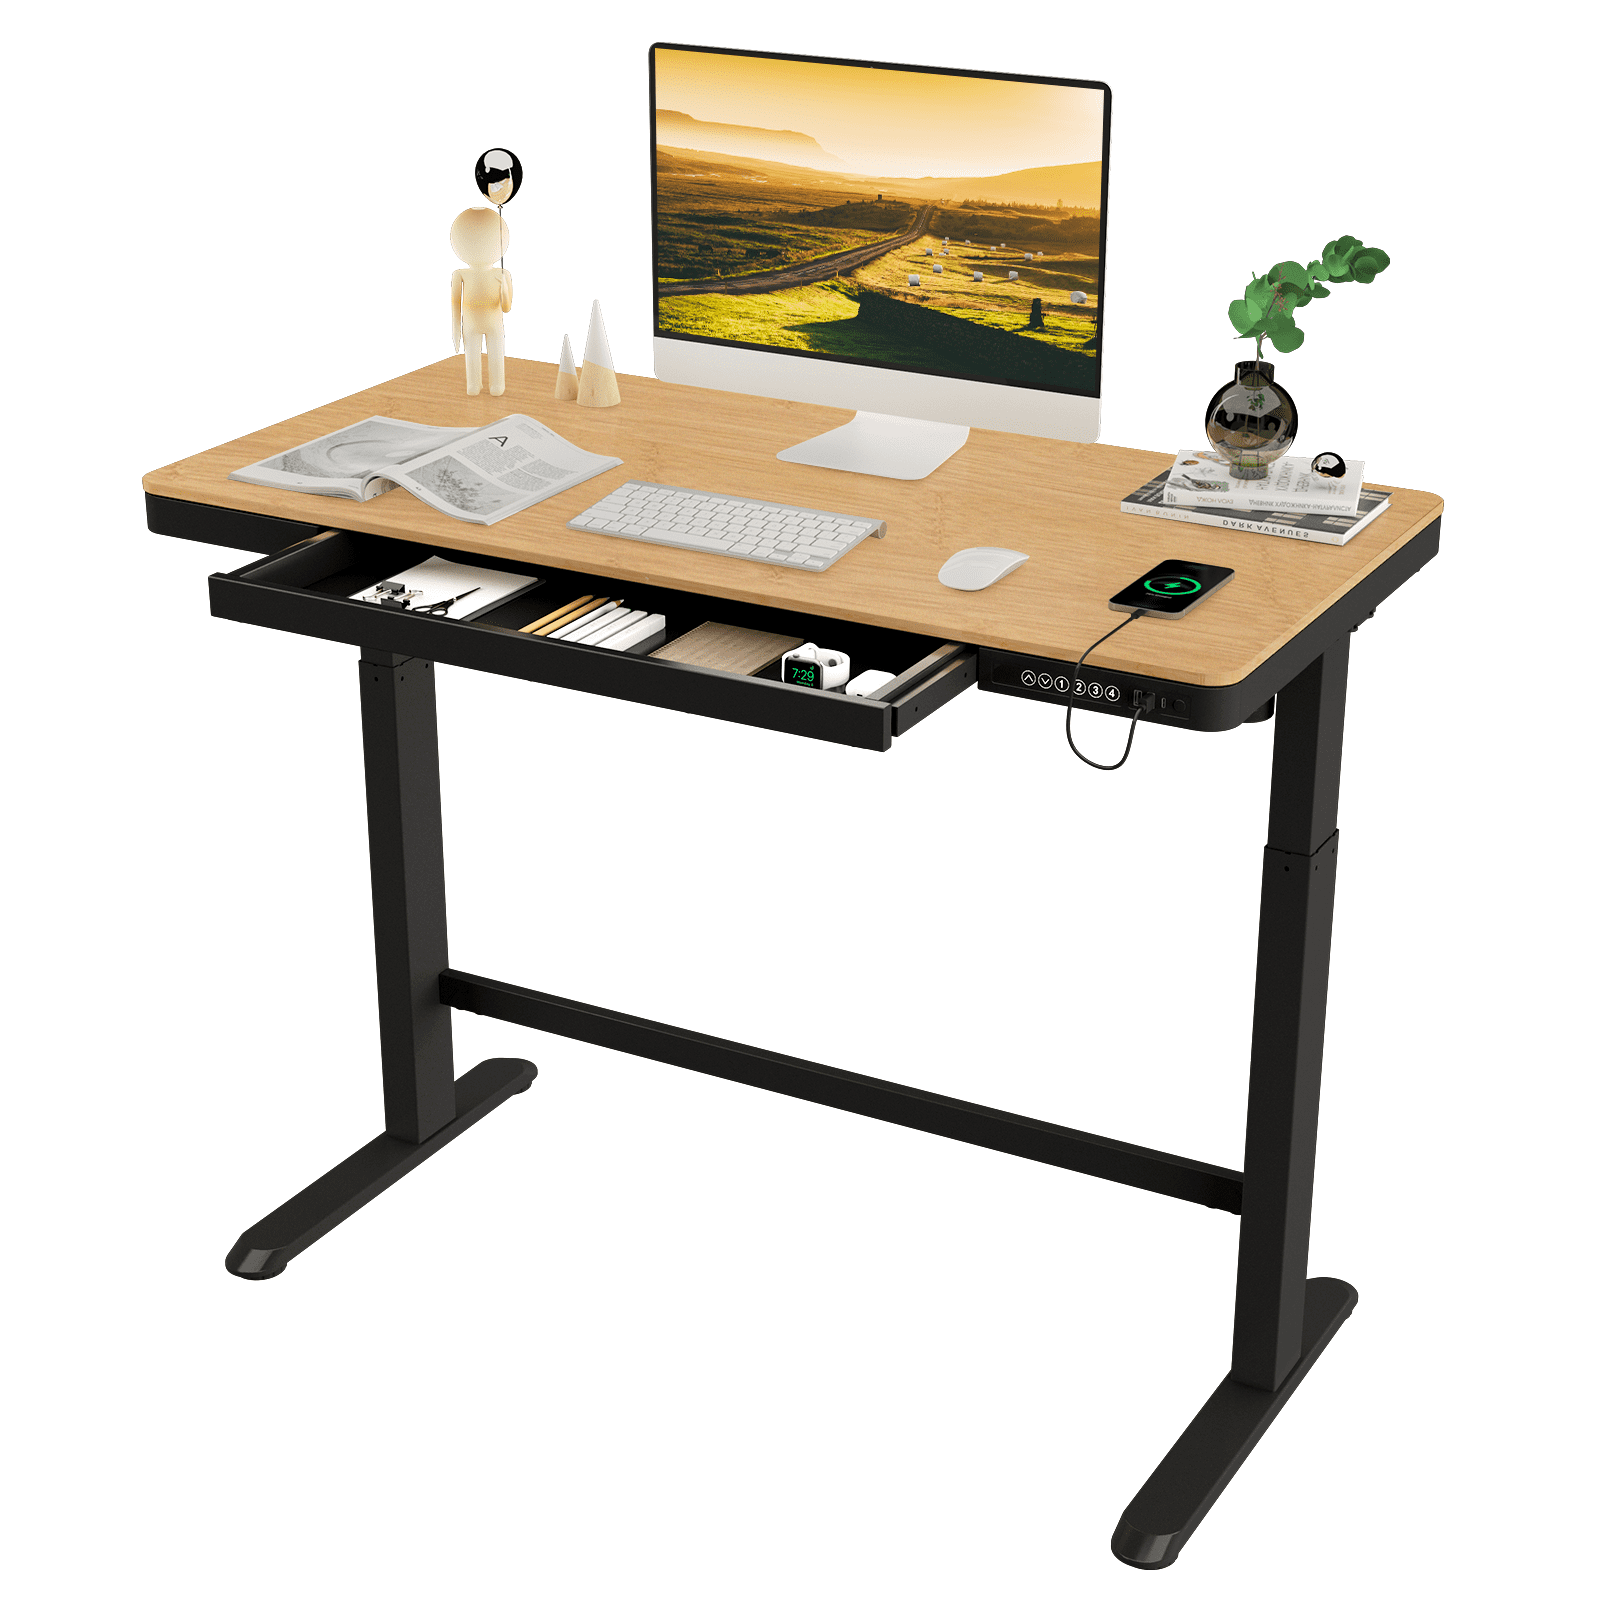 FlexiSpot E7 Bamboo Standing Desk - Stylish and Functional | 55×28 inch Bamboo Desktop & Black Frame | Stand Up Desk for Home Office